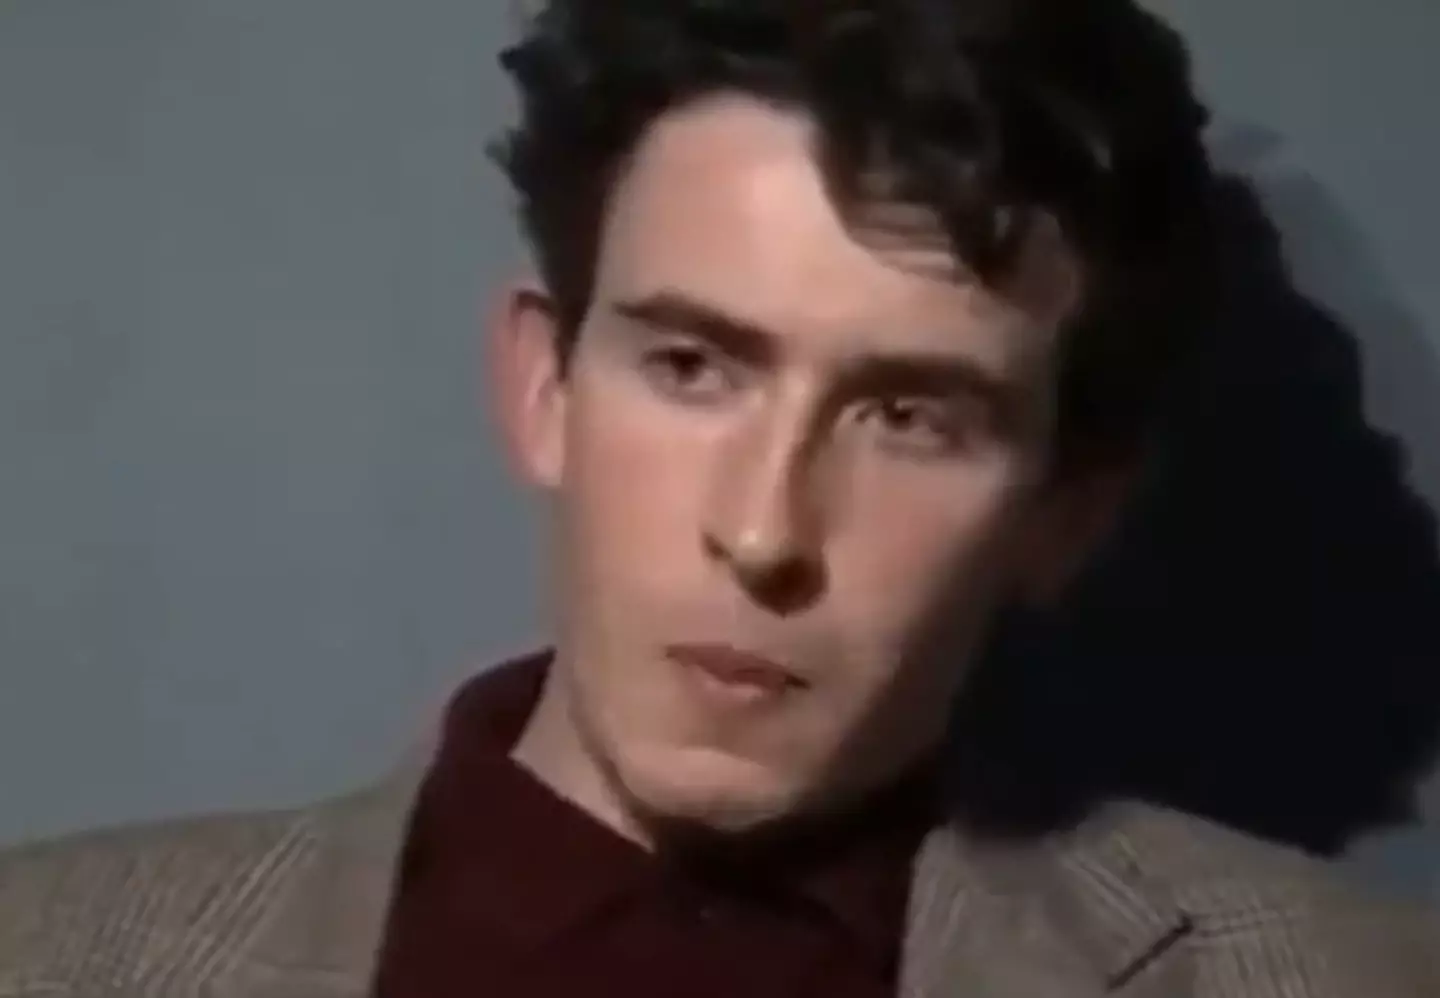 35 years ago Steve Coogan was in a radio interview and asked to do a Jimmy Savile impression.